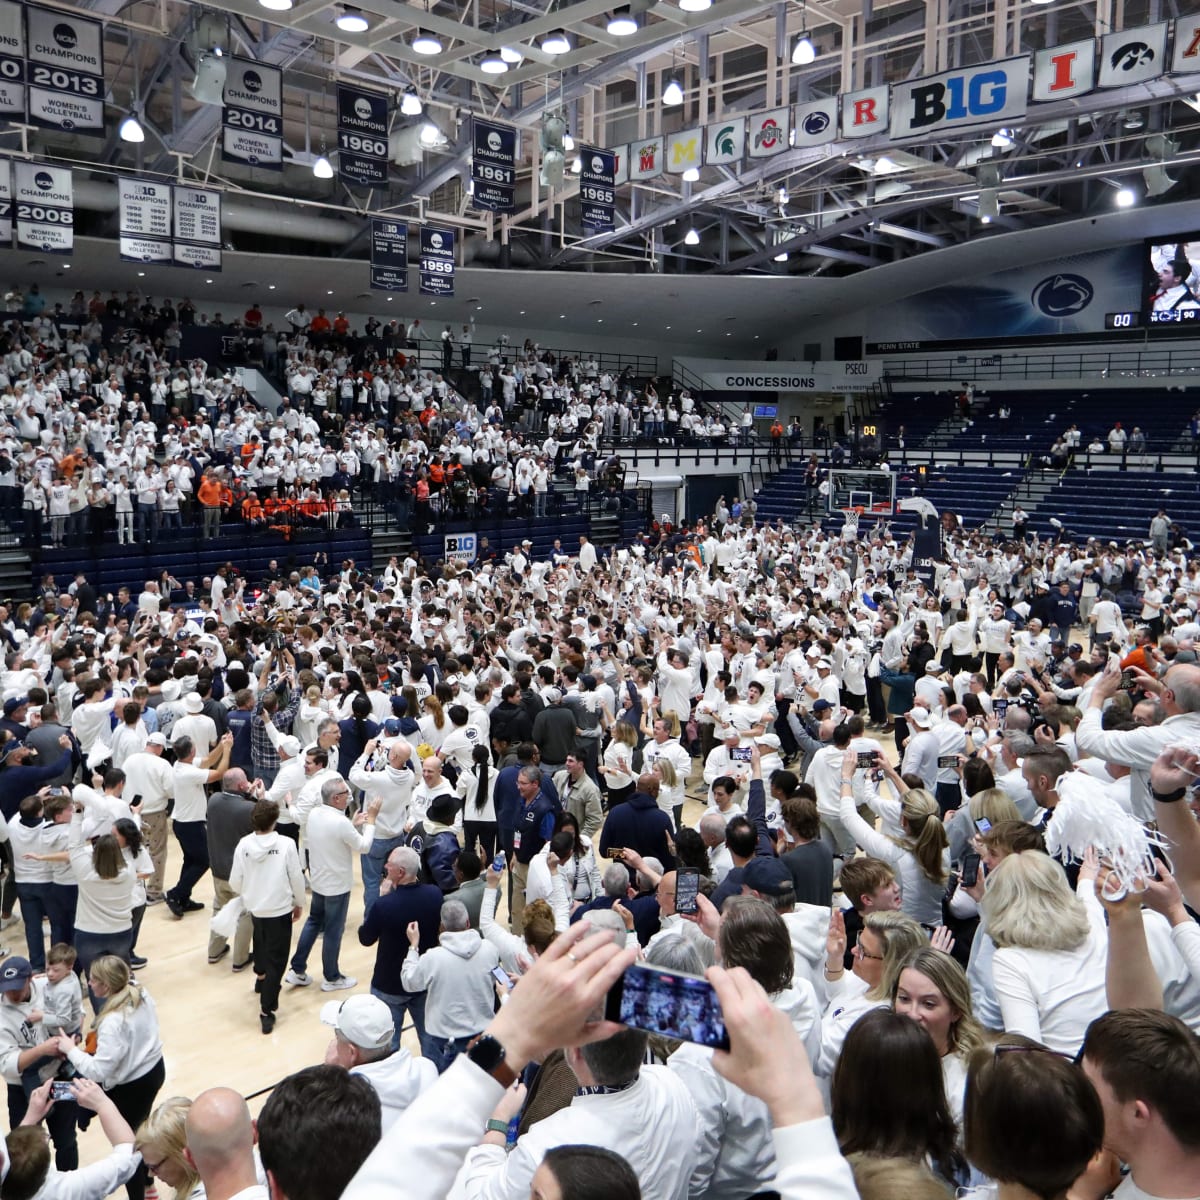 Penn State says fall sports will be played without fans